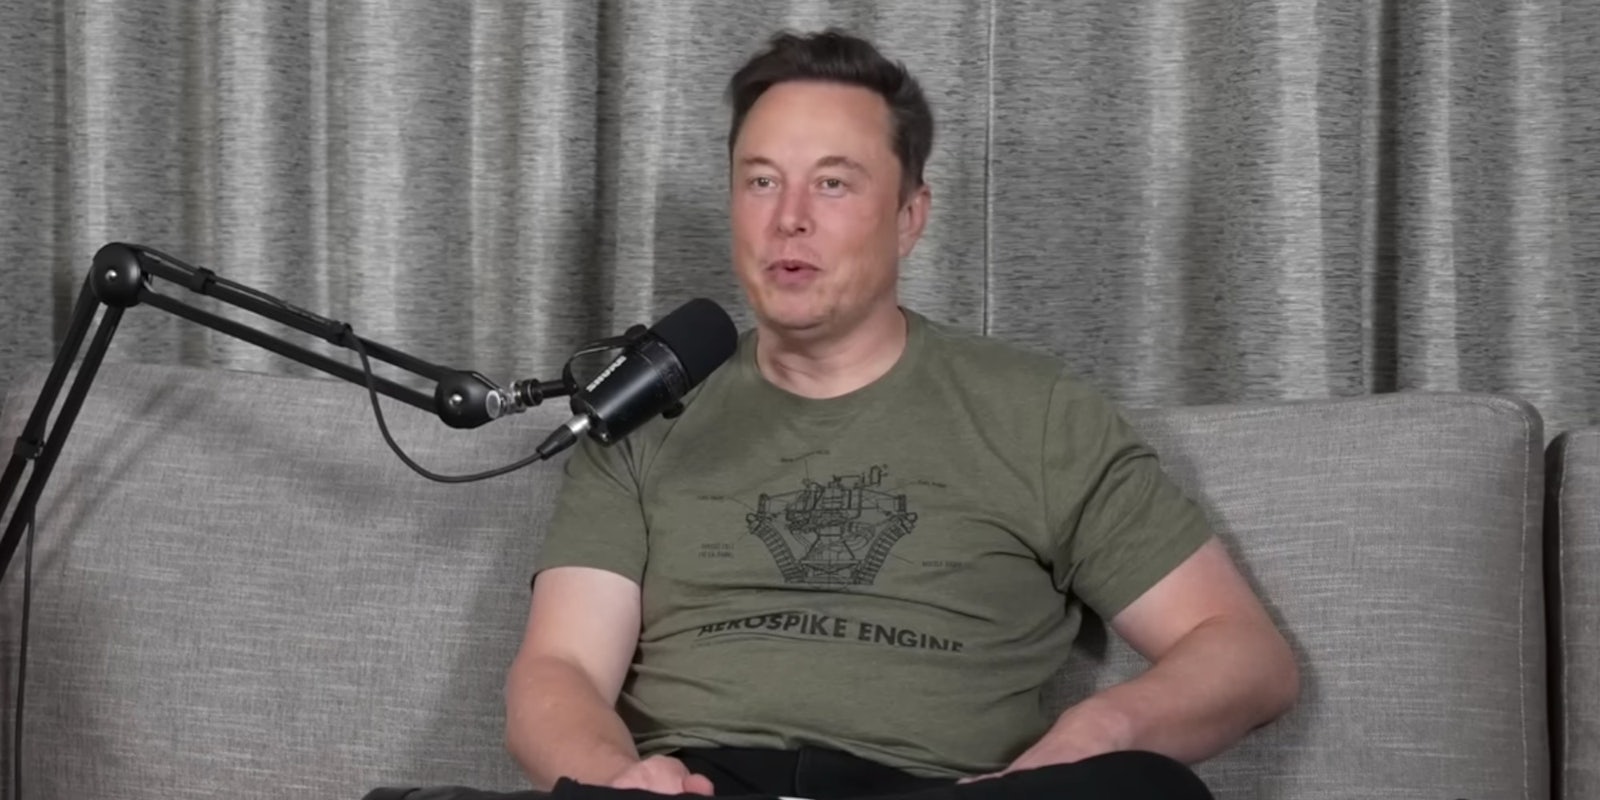 Elon Musk sitting on a couch and speaking into a microphone